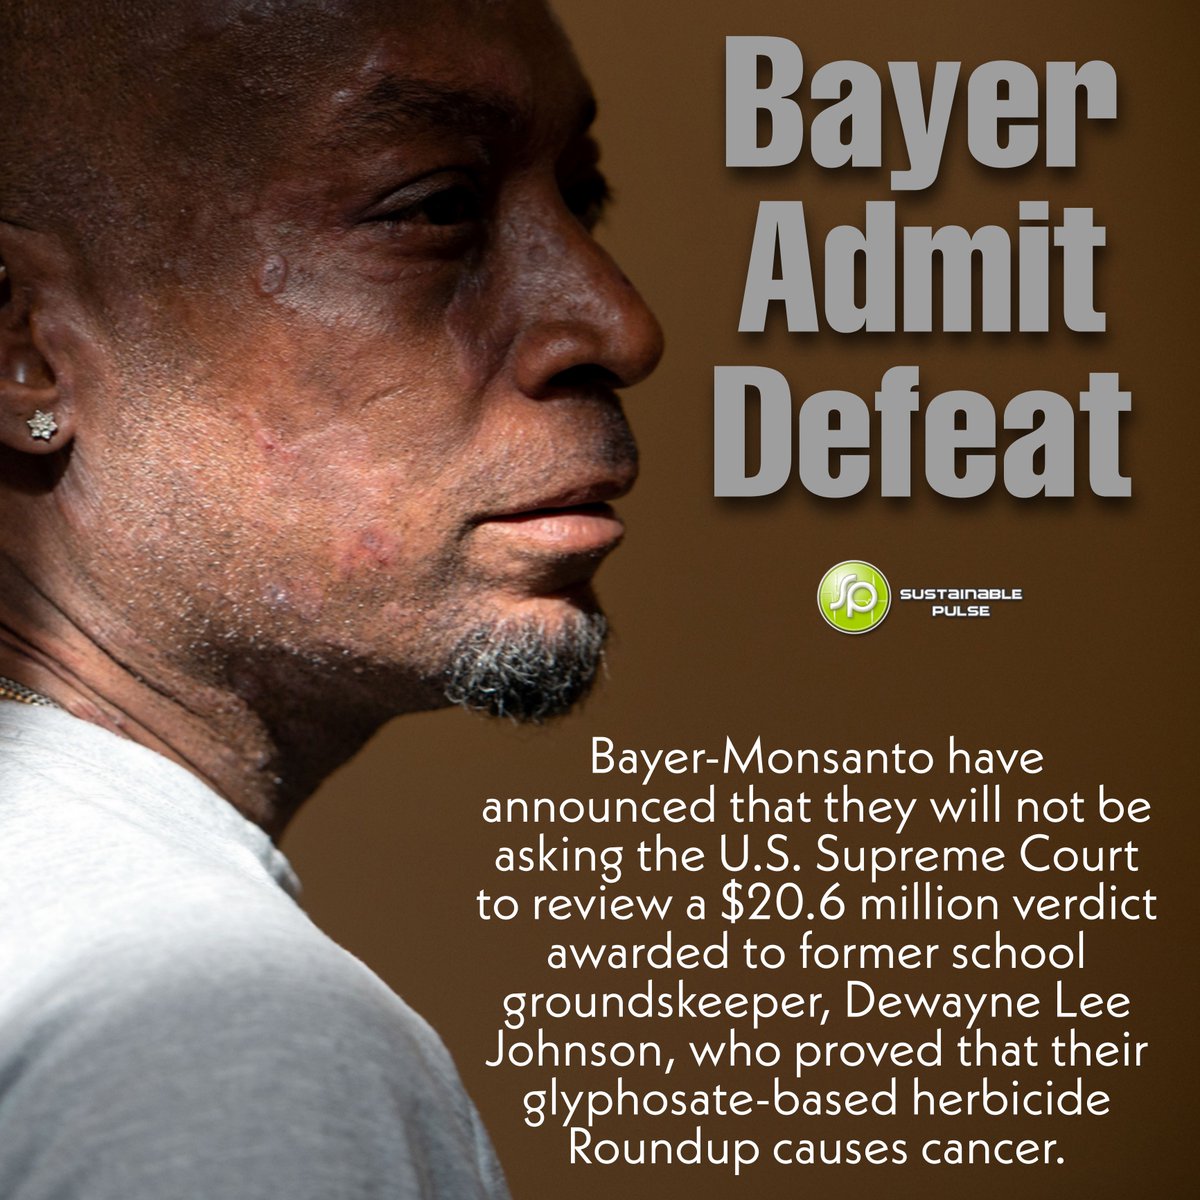 Some great news! #Bayer have admitted defeat and all those who are fiighting against #glyphosate globally have a major victory! sustainablepulse.com/2021/03/26/bay…